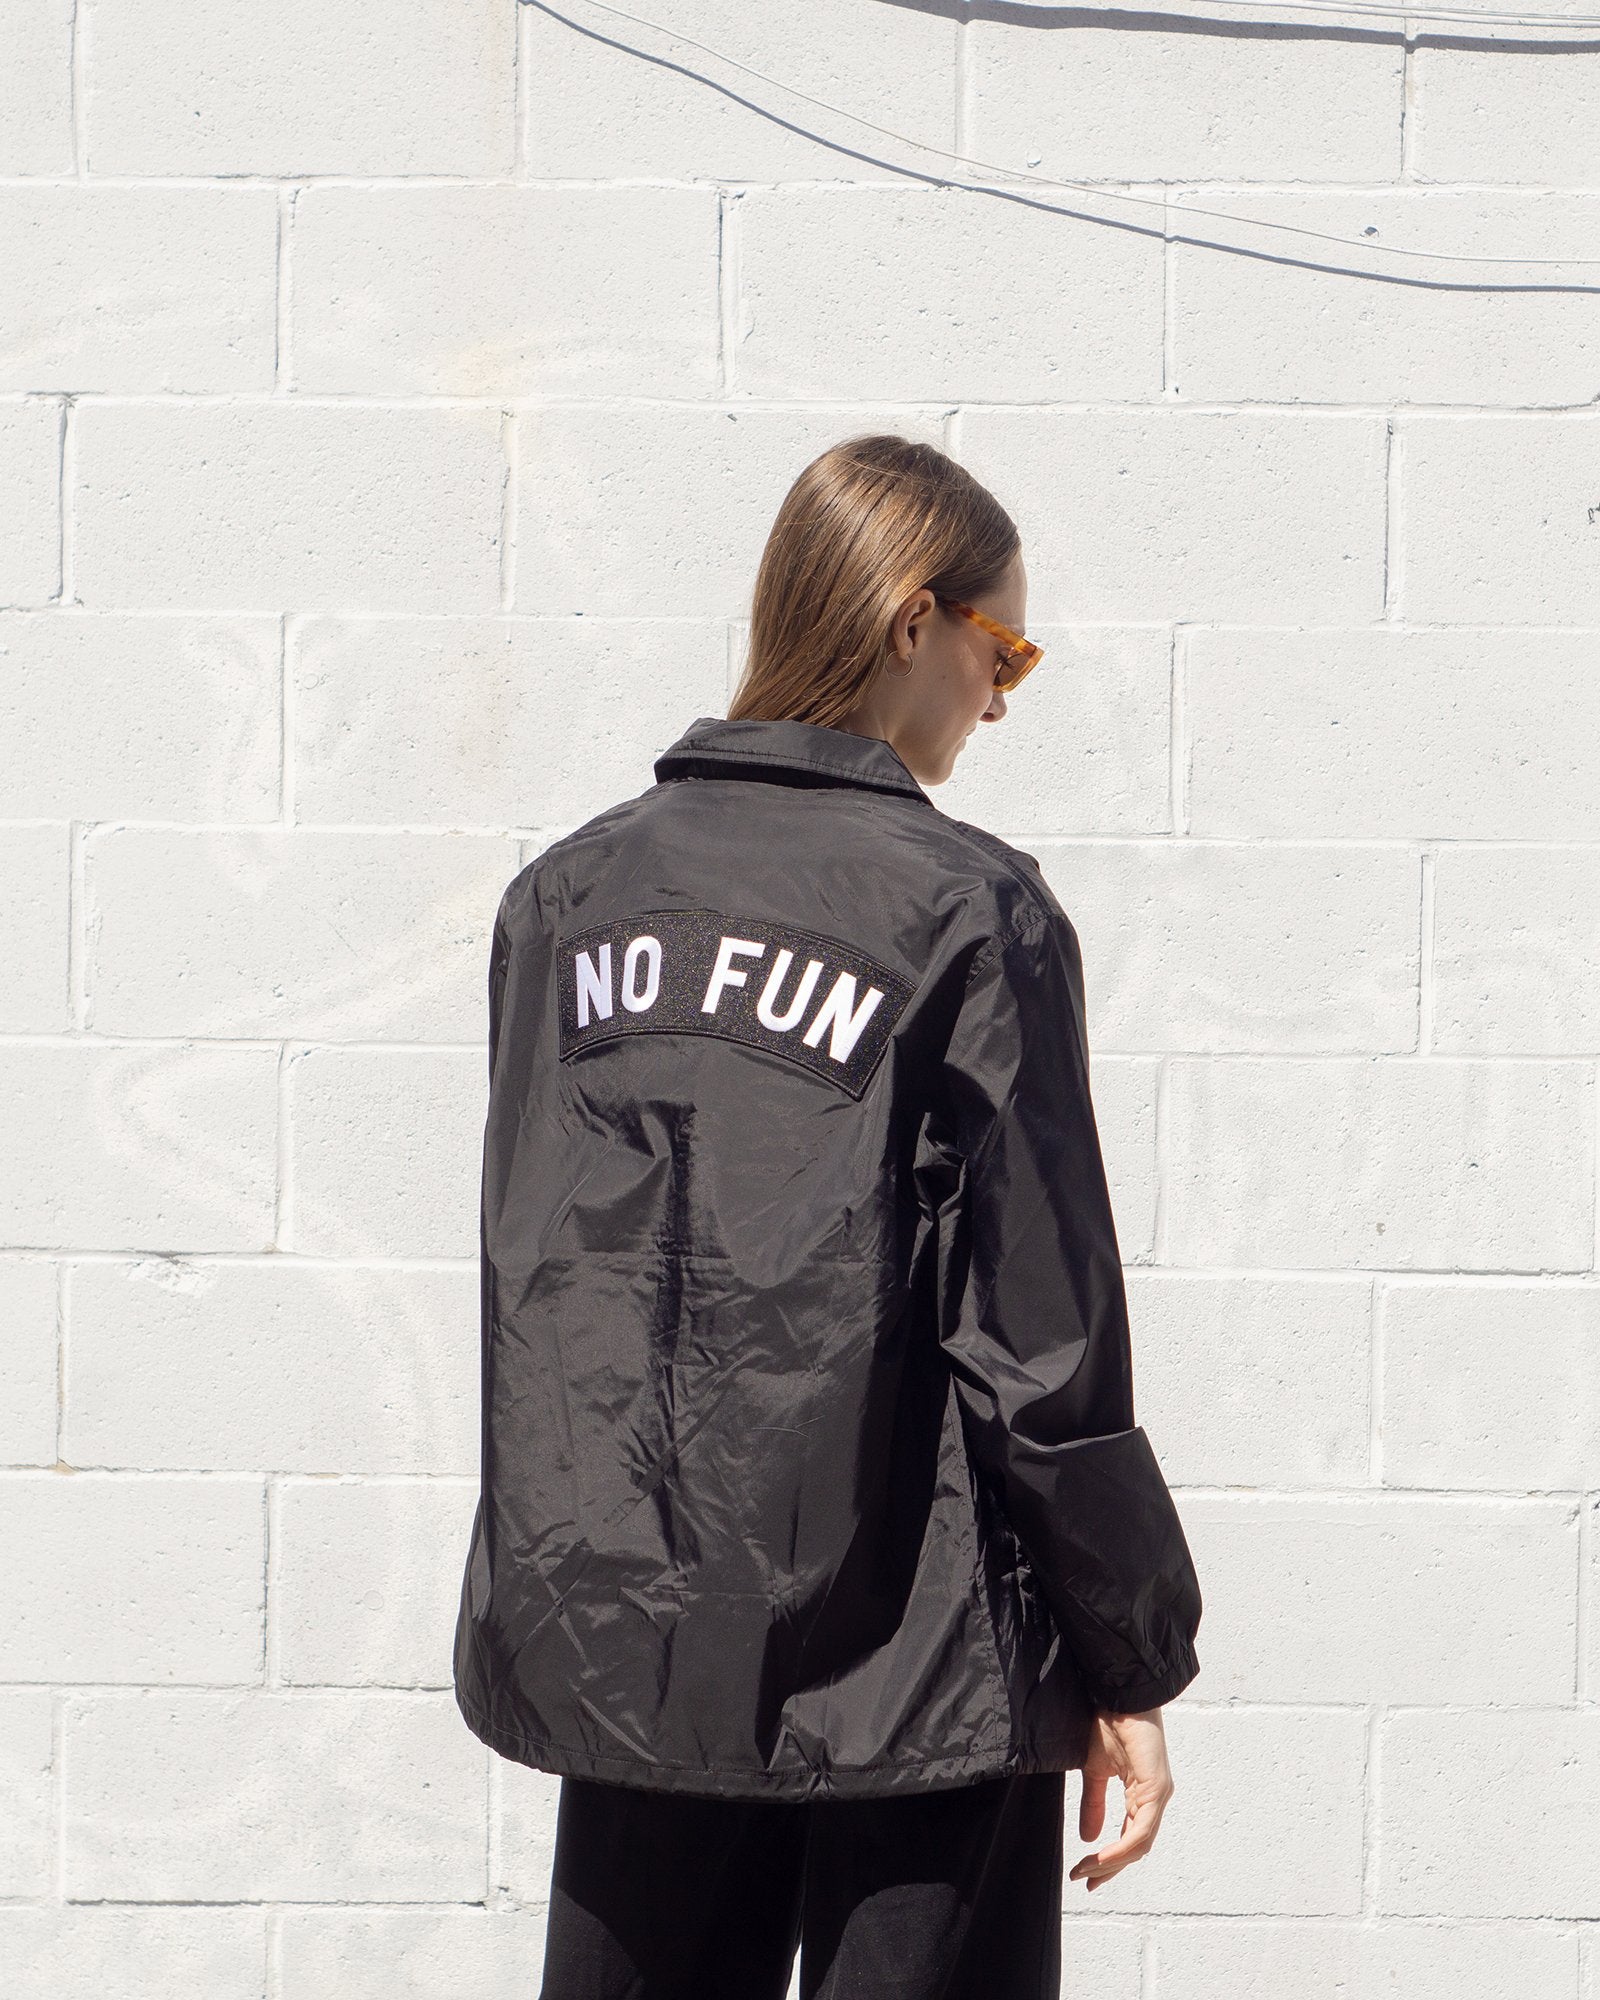 Photo of a female model wearing the "NO FUN®" X "Crawling Death" collaboration coaches jacket.  The model is showcasing the extra large "NO FUN®" logo back patch which is found on the back of the jacket.